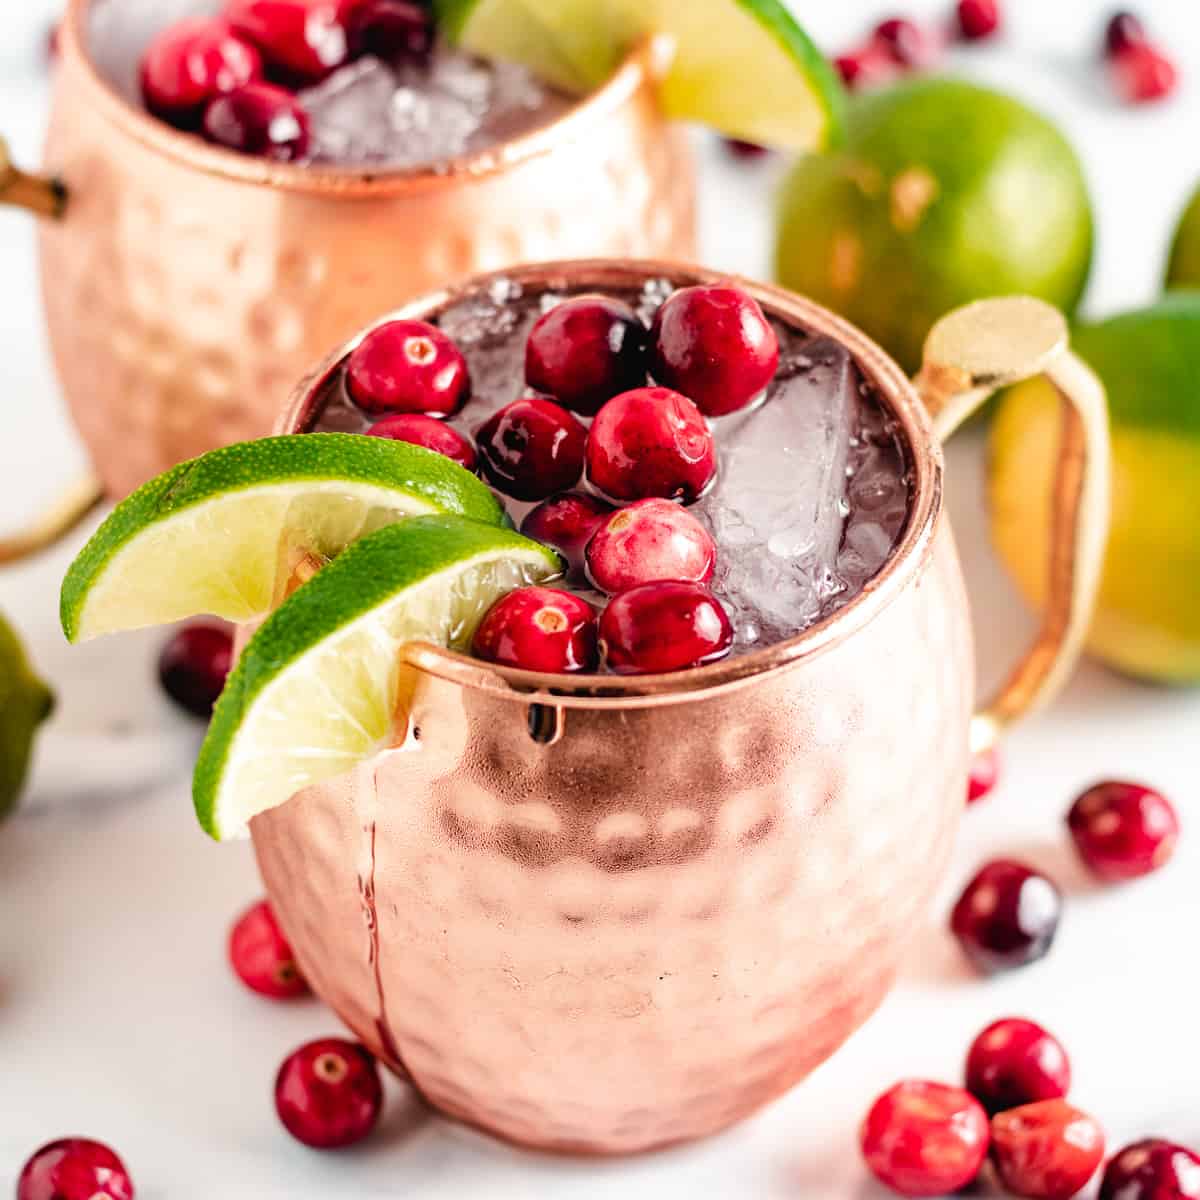 Cranberry moscow mule